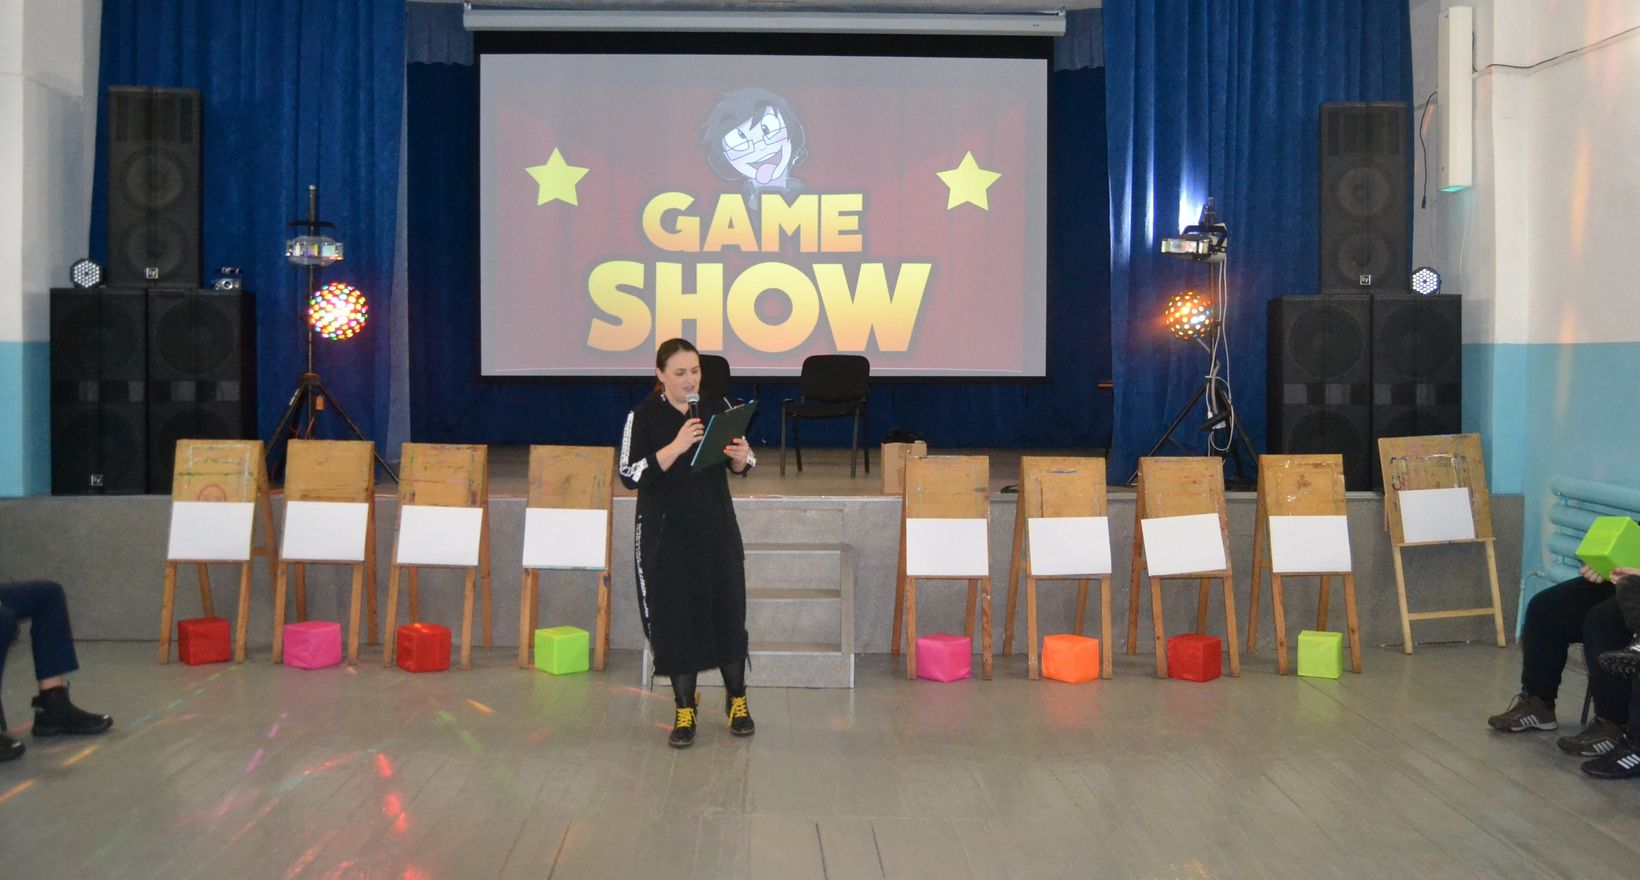 Game show